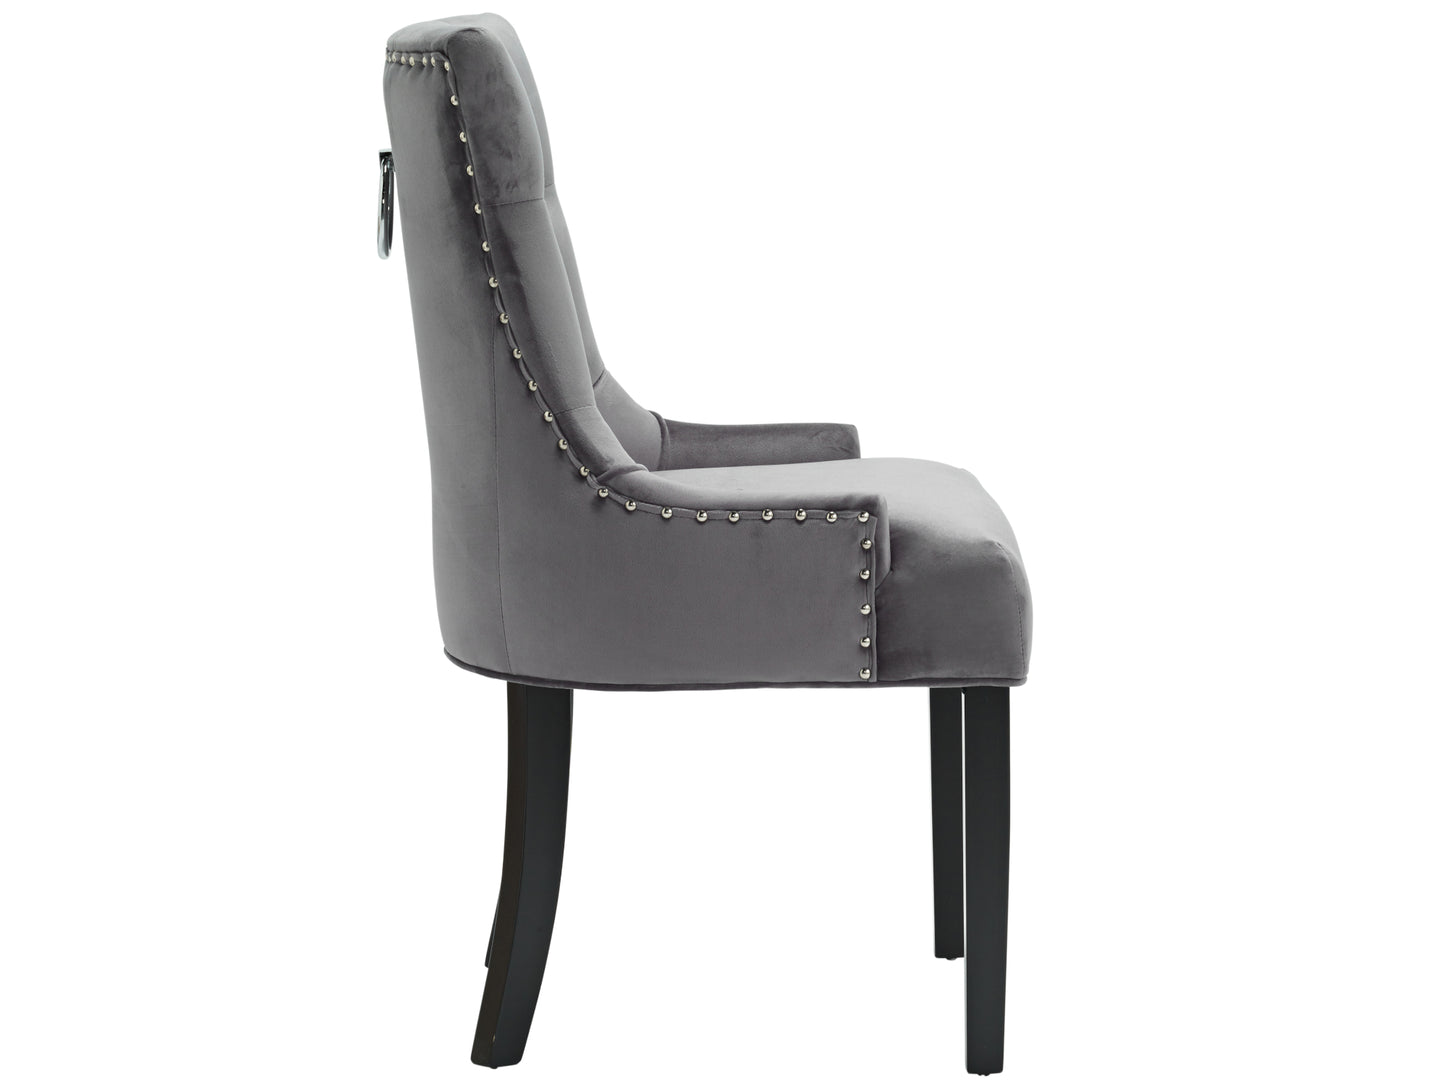 Morgan Dining Chair in Grey (2 Pack)